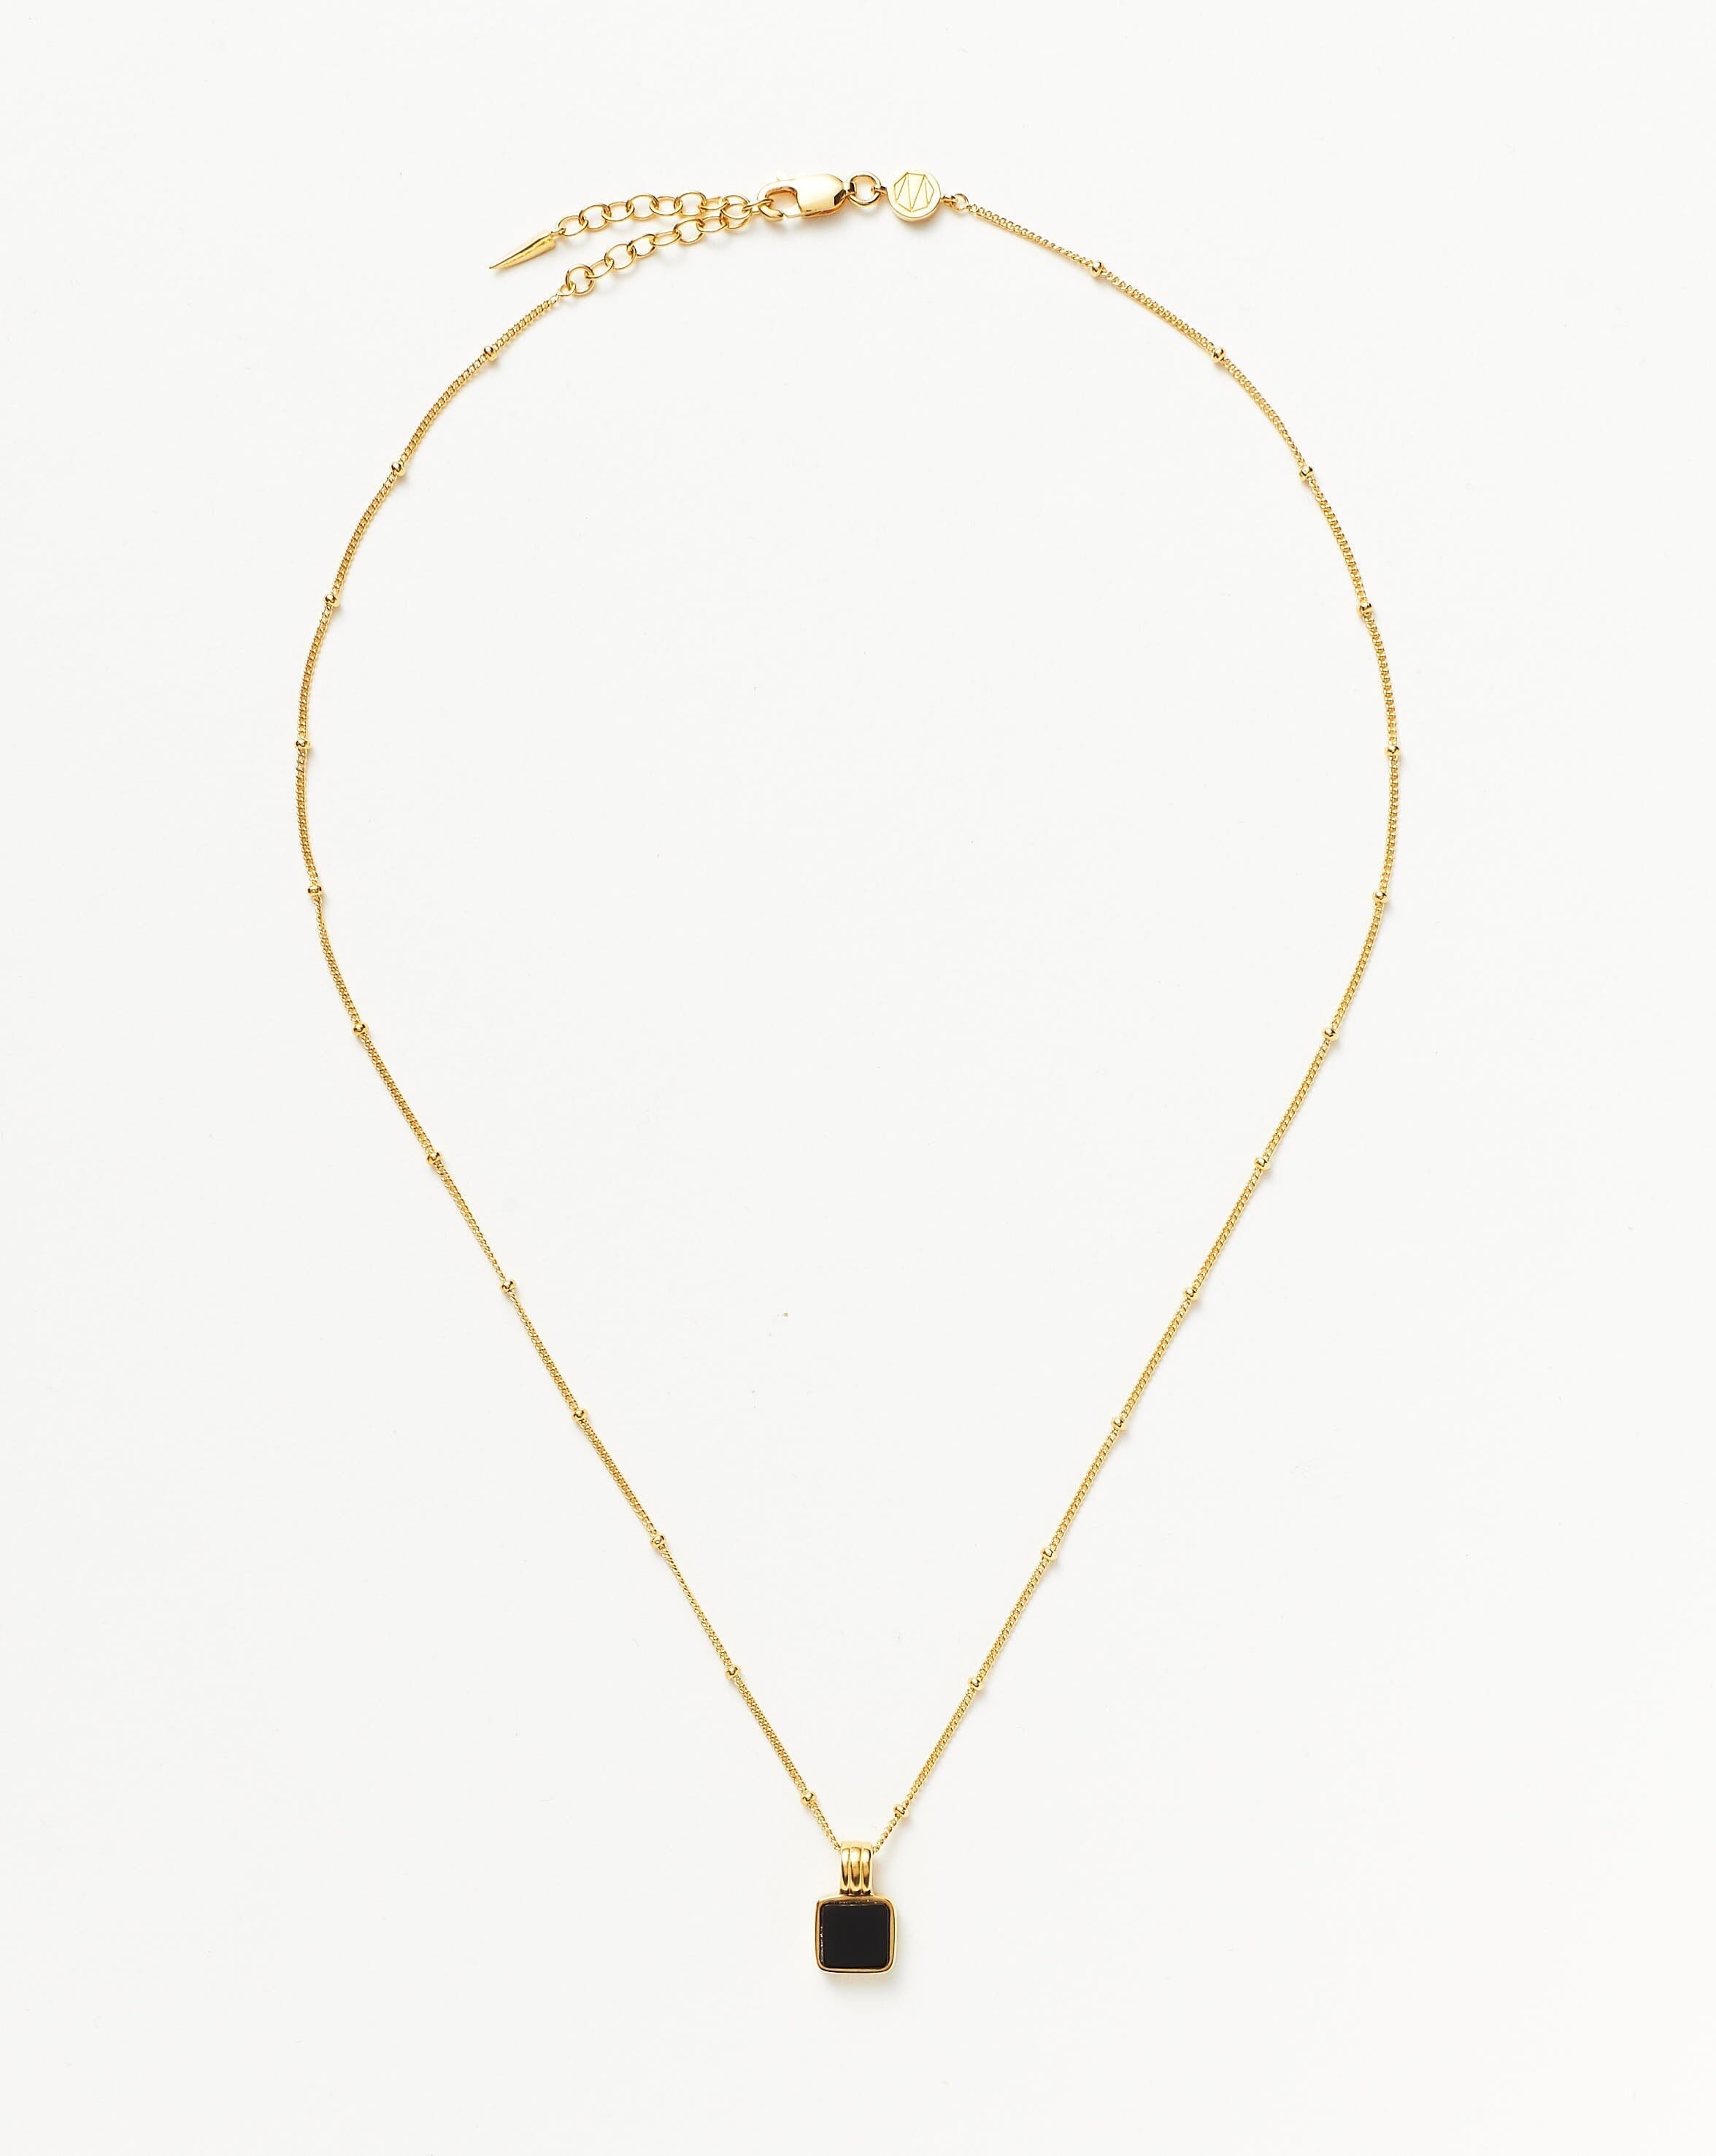 Lucy Williams Square Onyx Gemstone Necklace | 18ct Gold Plated Vermeil/Black Onyx Necklaces Missoma 